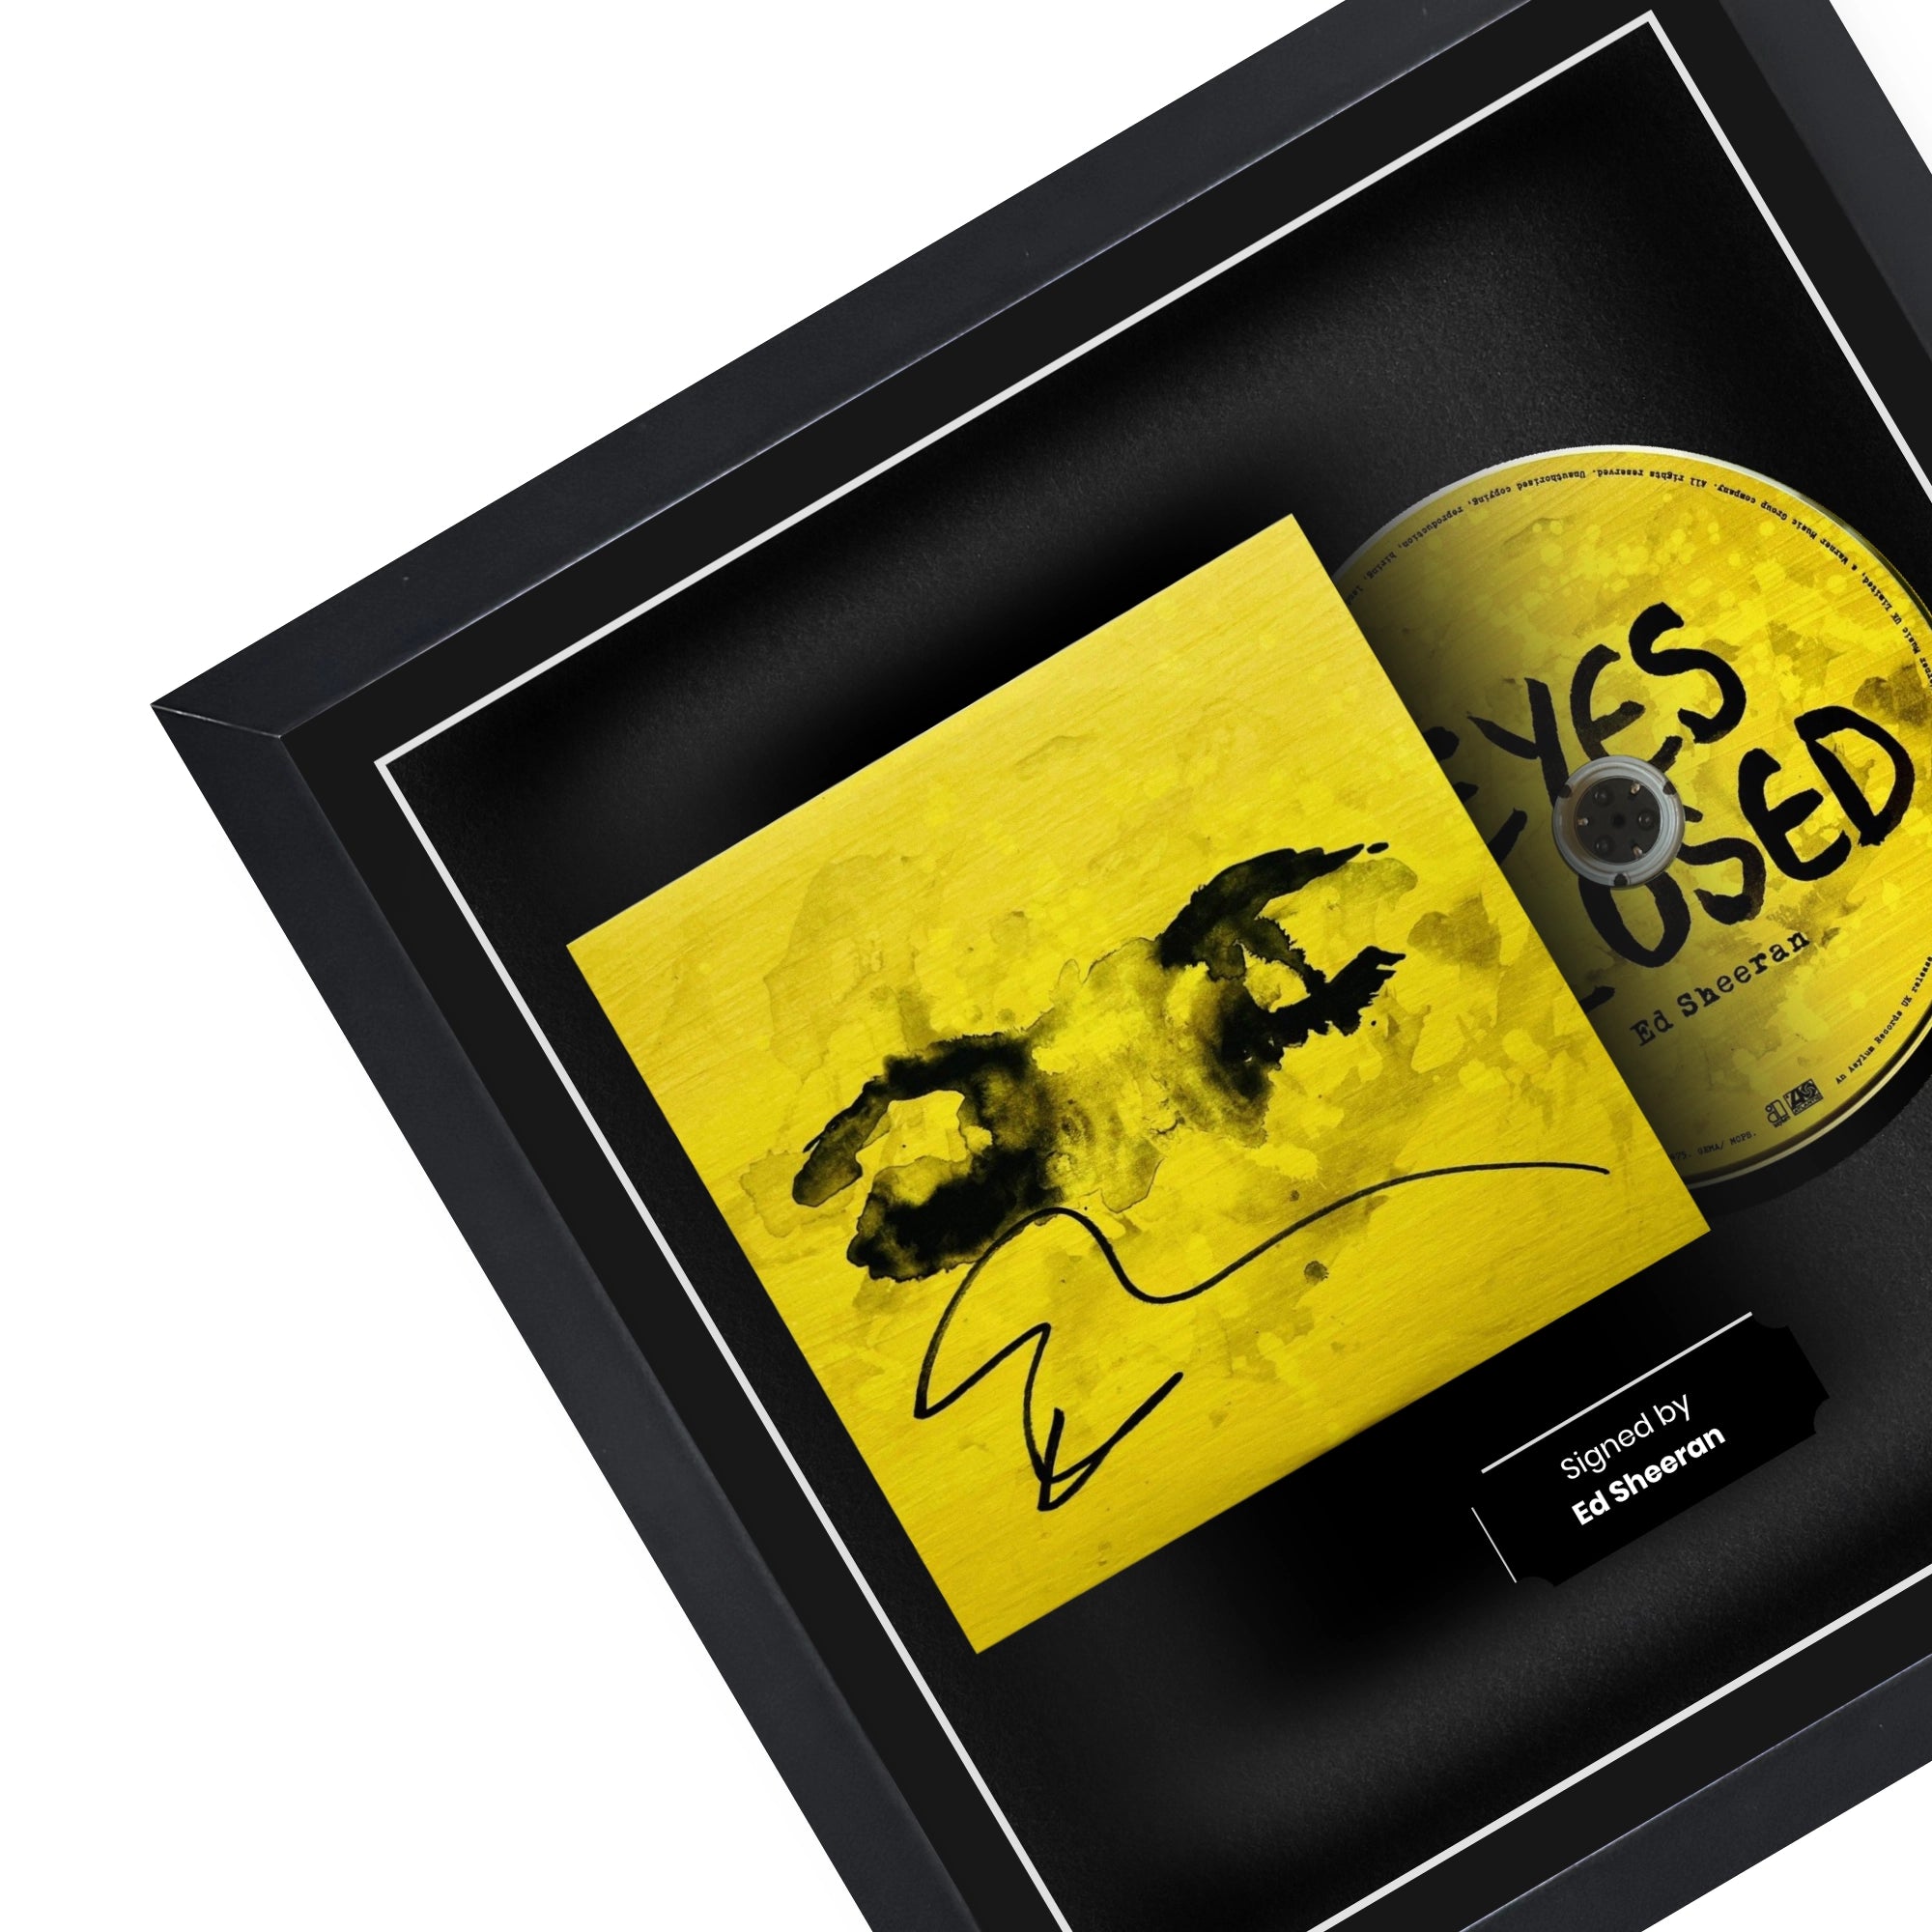 Frame a Audio CD displayed inside a frame, the perfect way to showcase your CD.